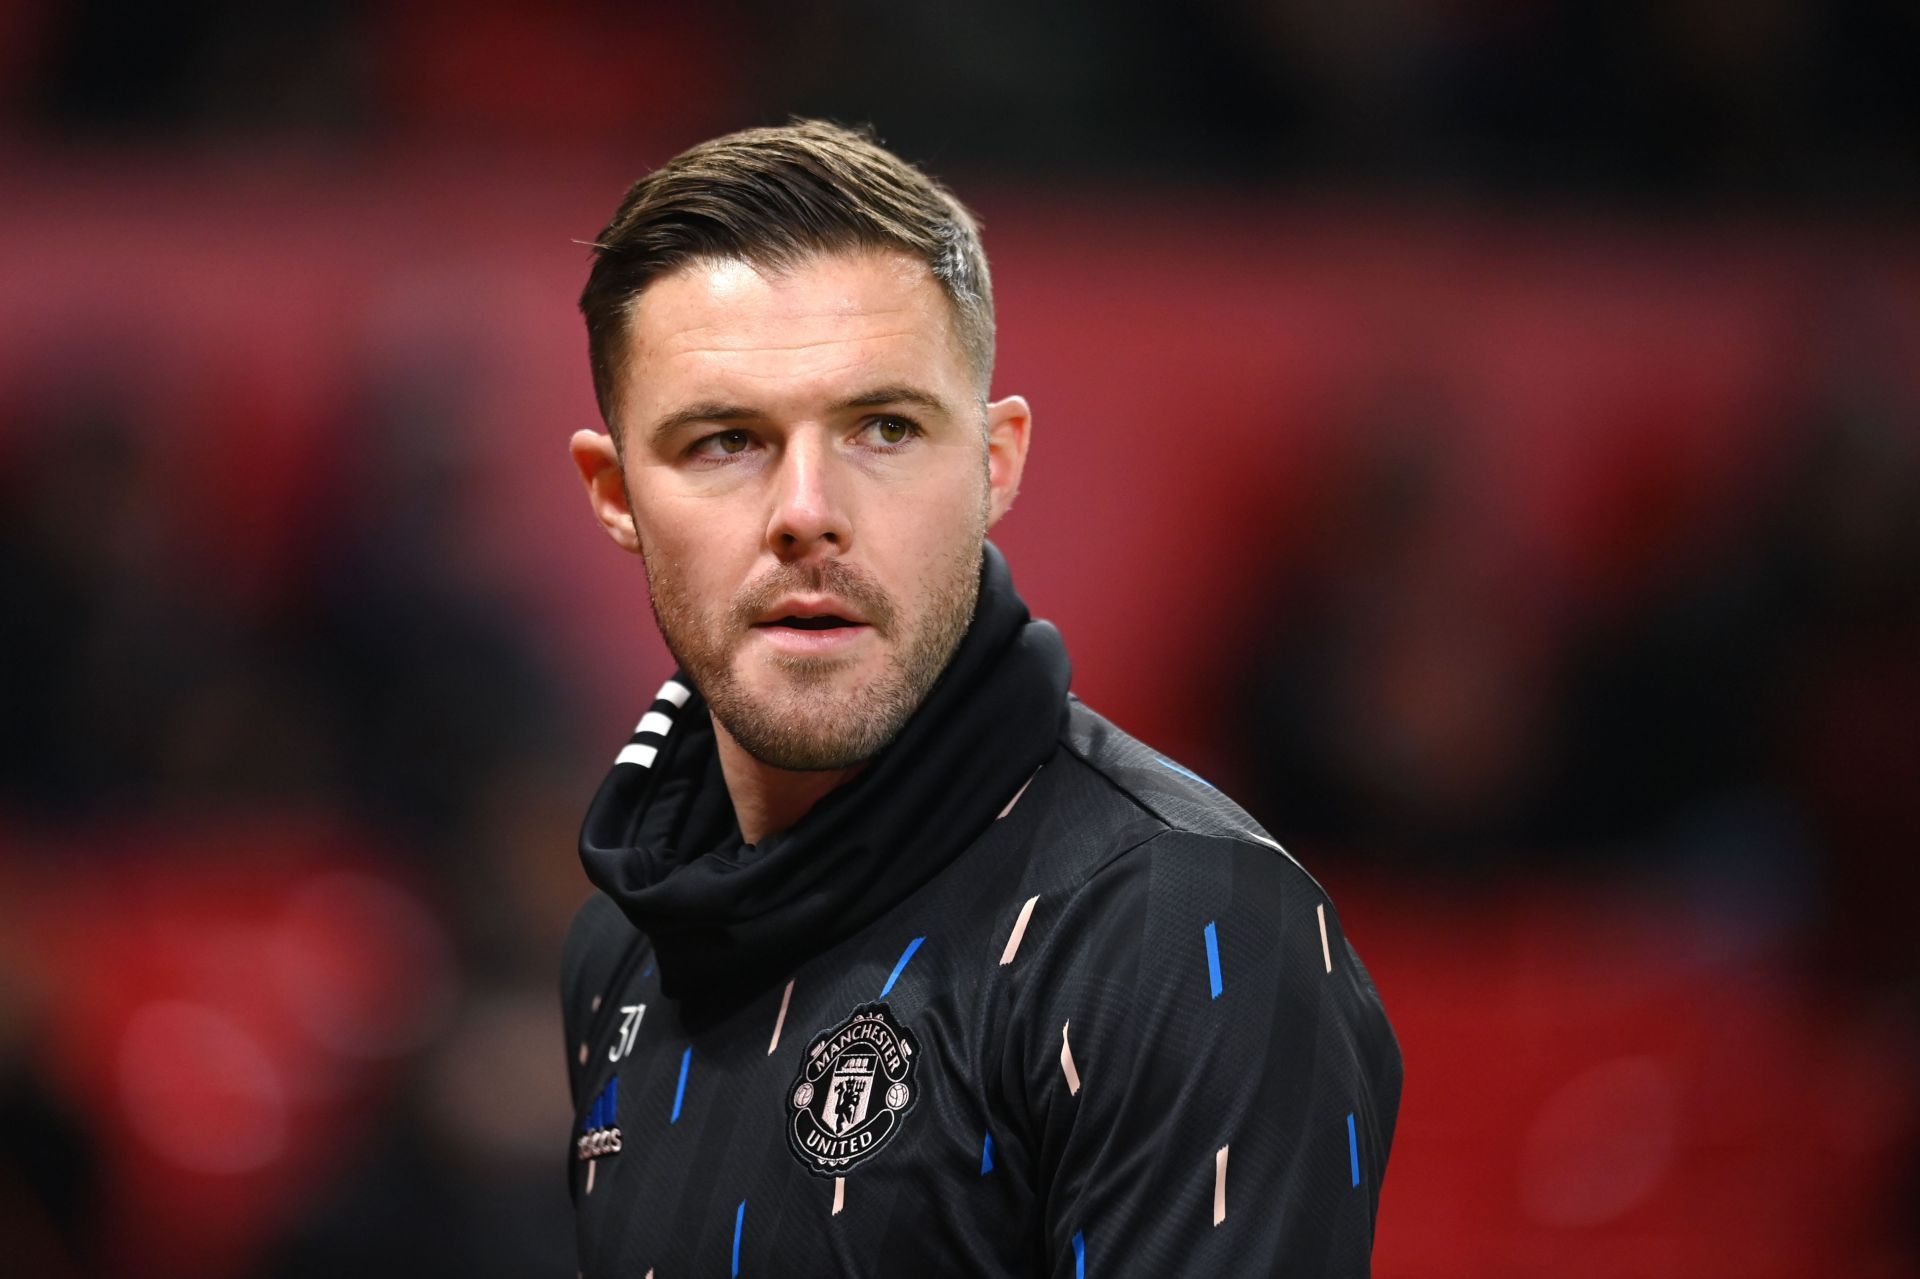 Jack Butland will leave the club when his loan expires.